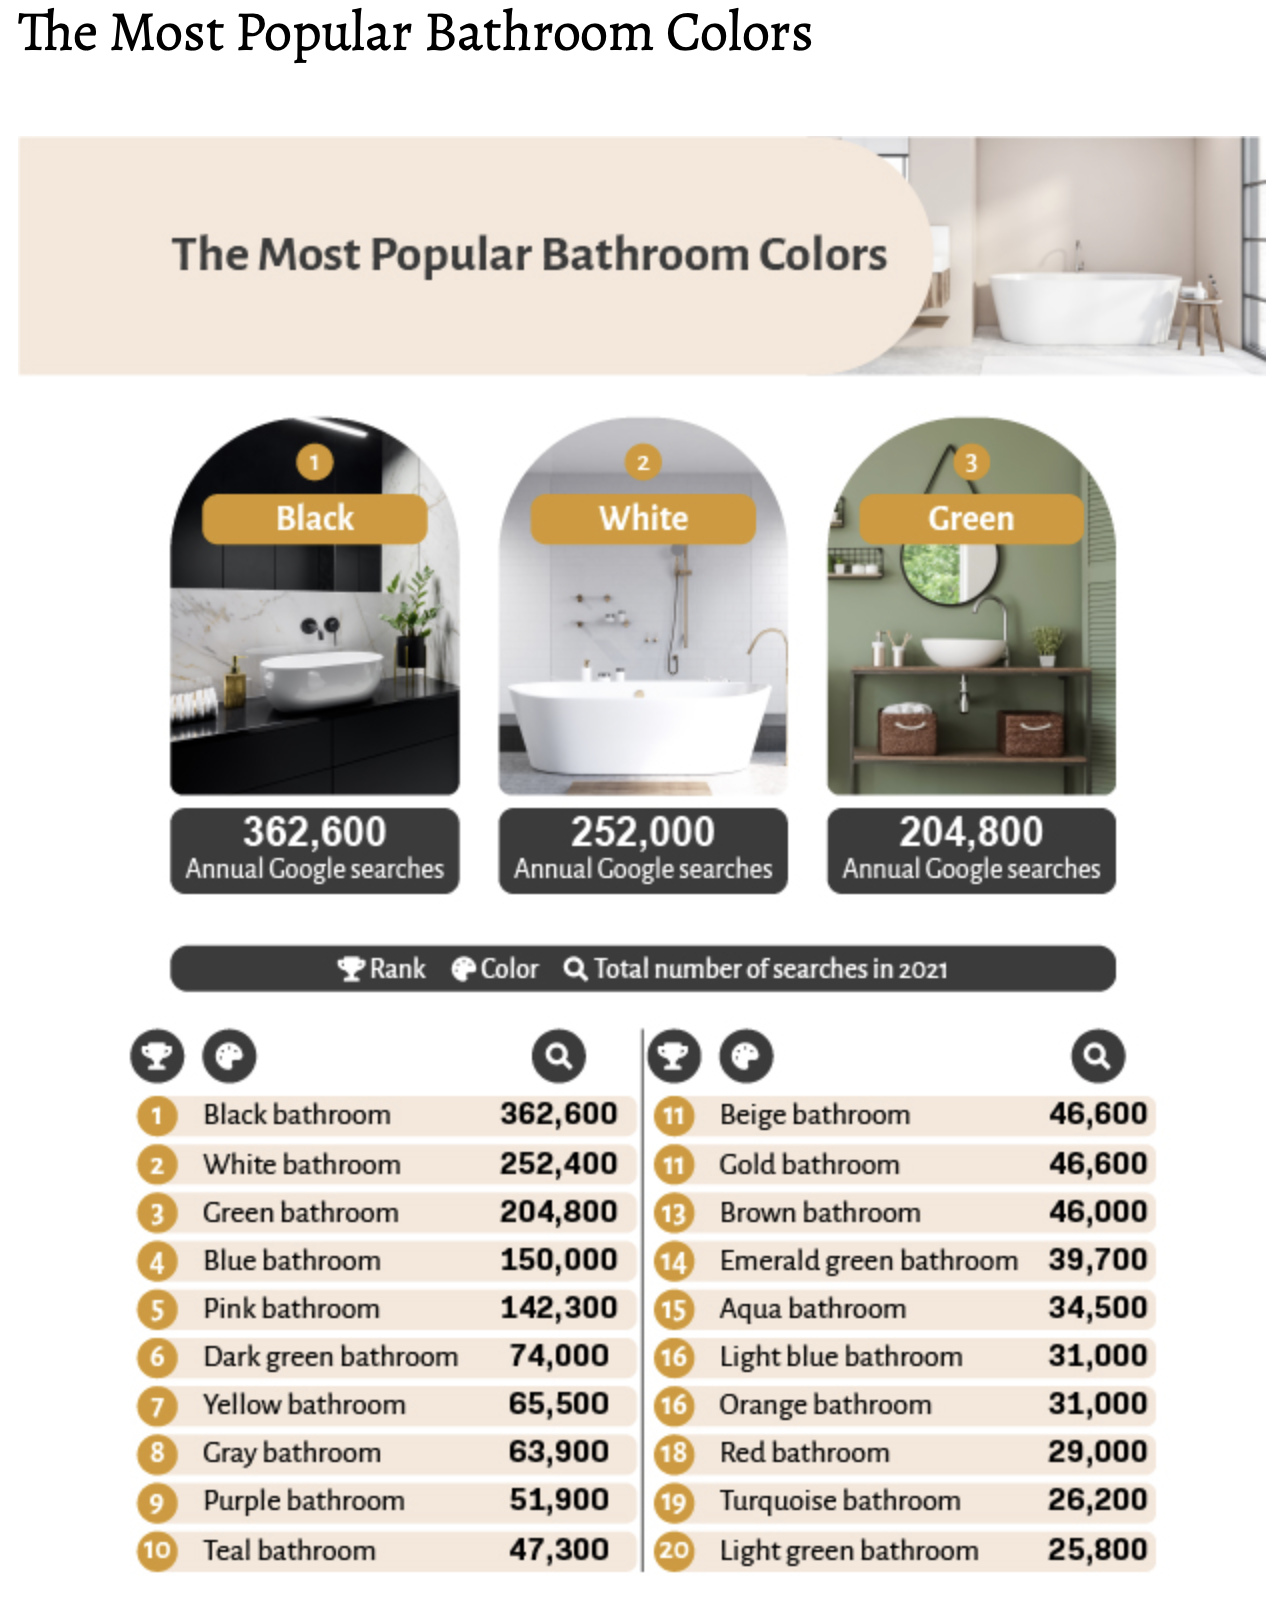 A visual list of the most popular bathroom colors, the top three being black, white, and green.